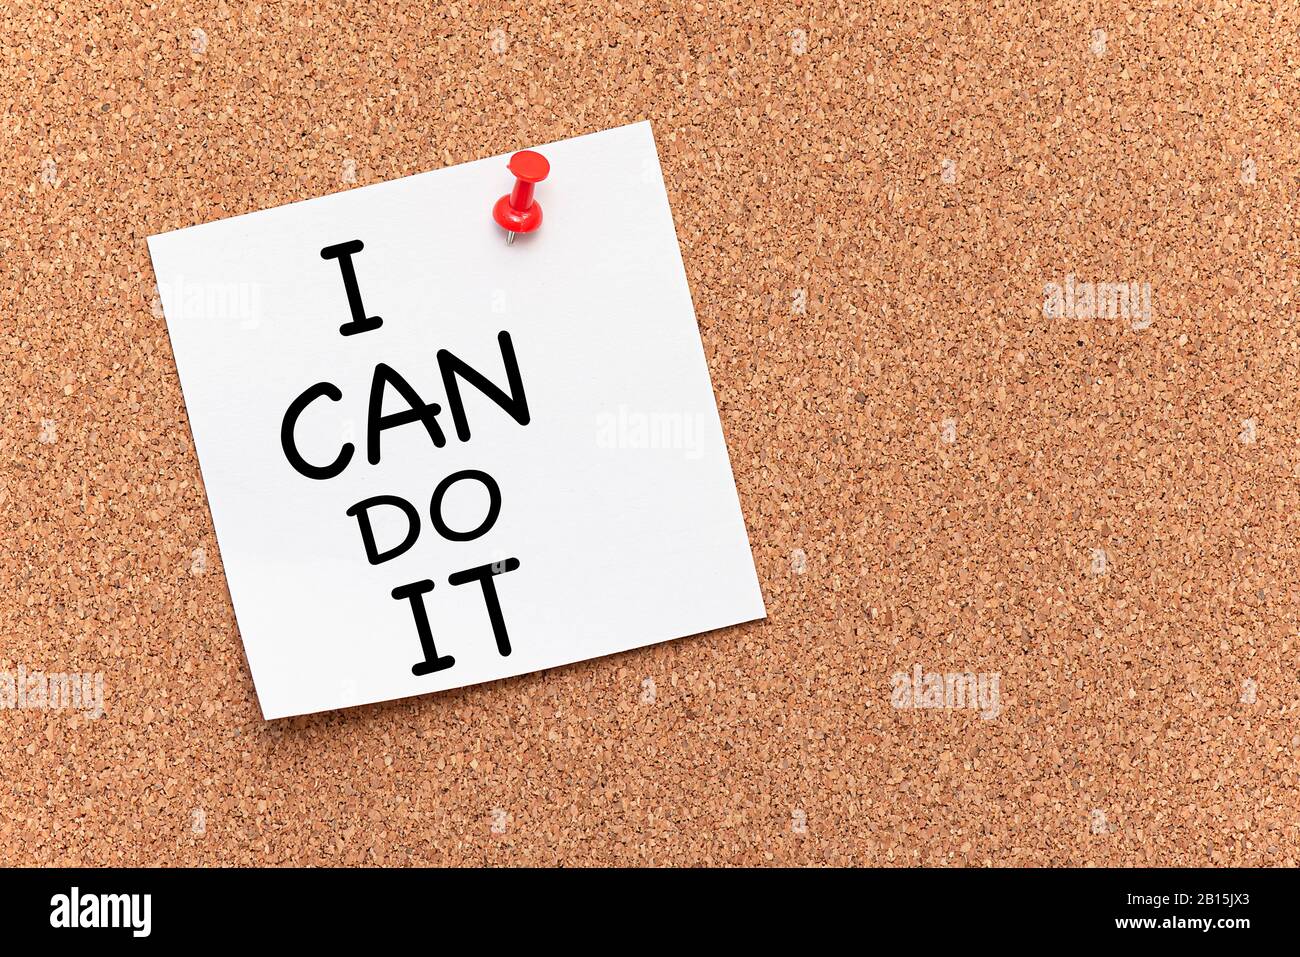 I Can Do It Text On Cork Board Concept Picture Stock Photo Alamy